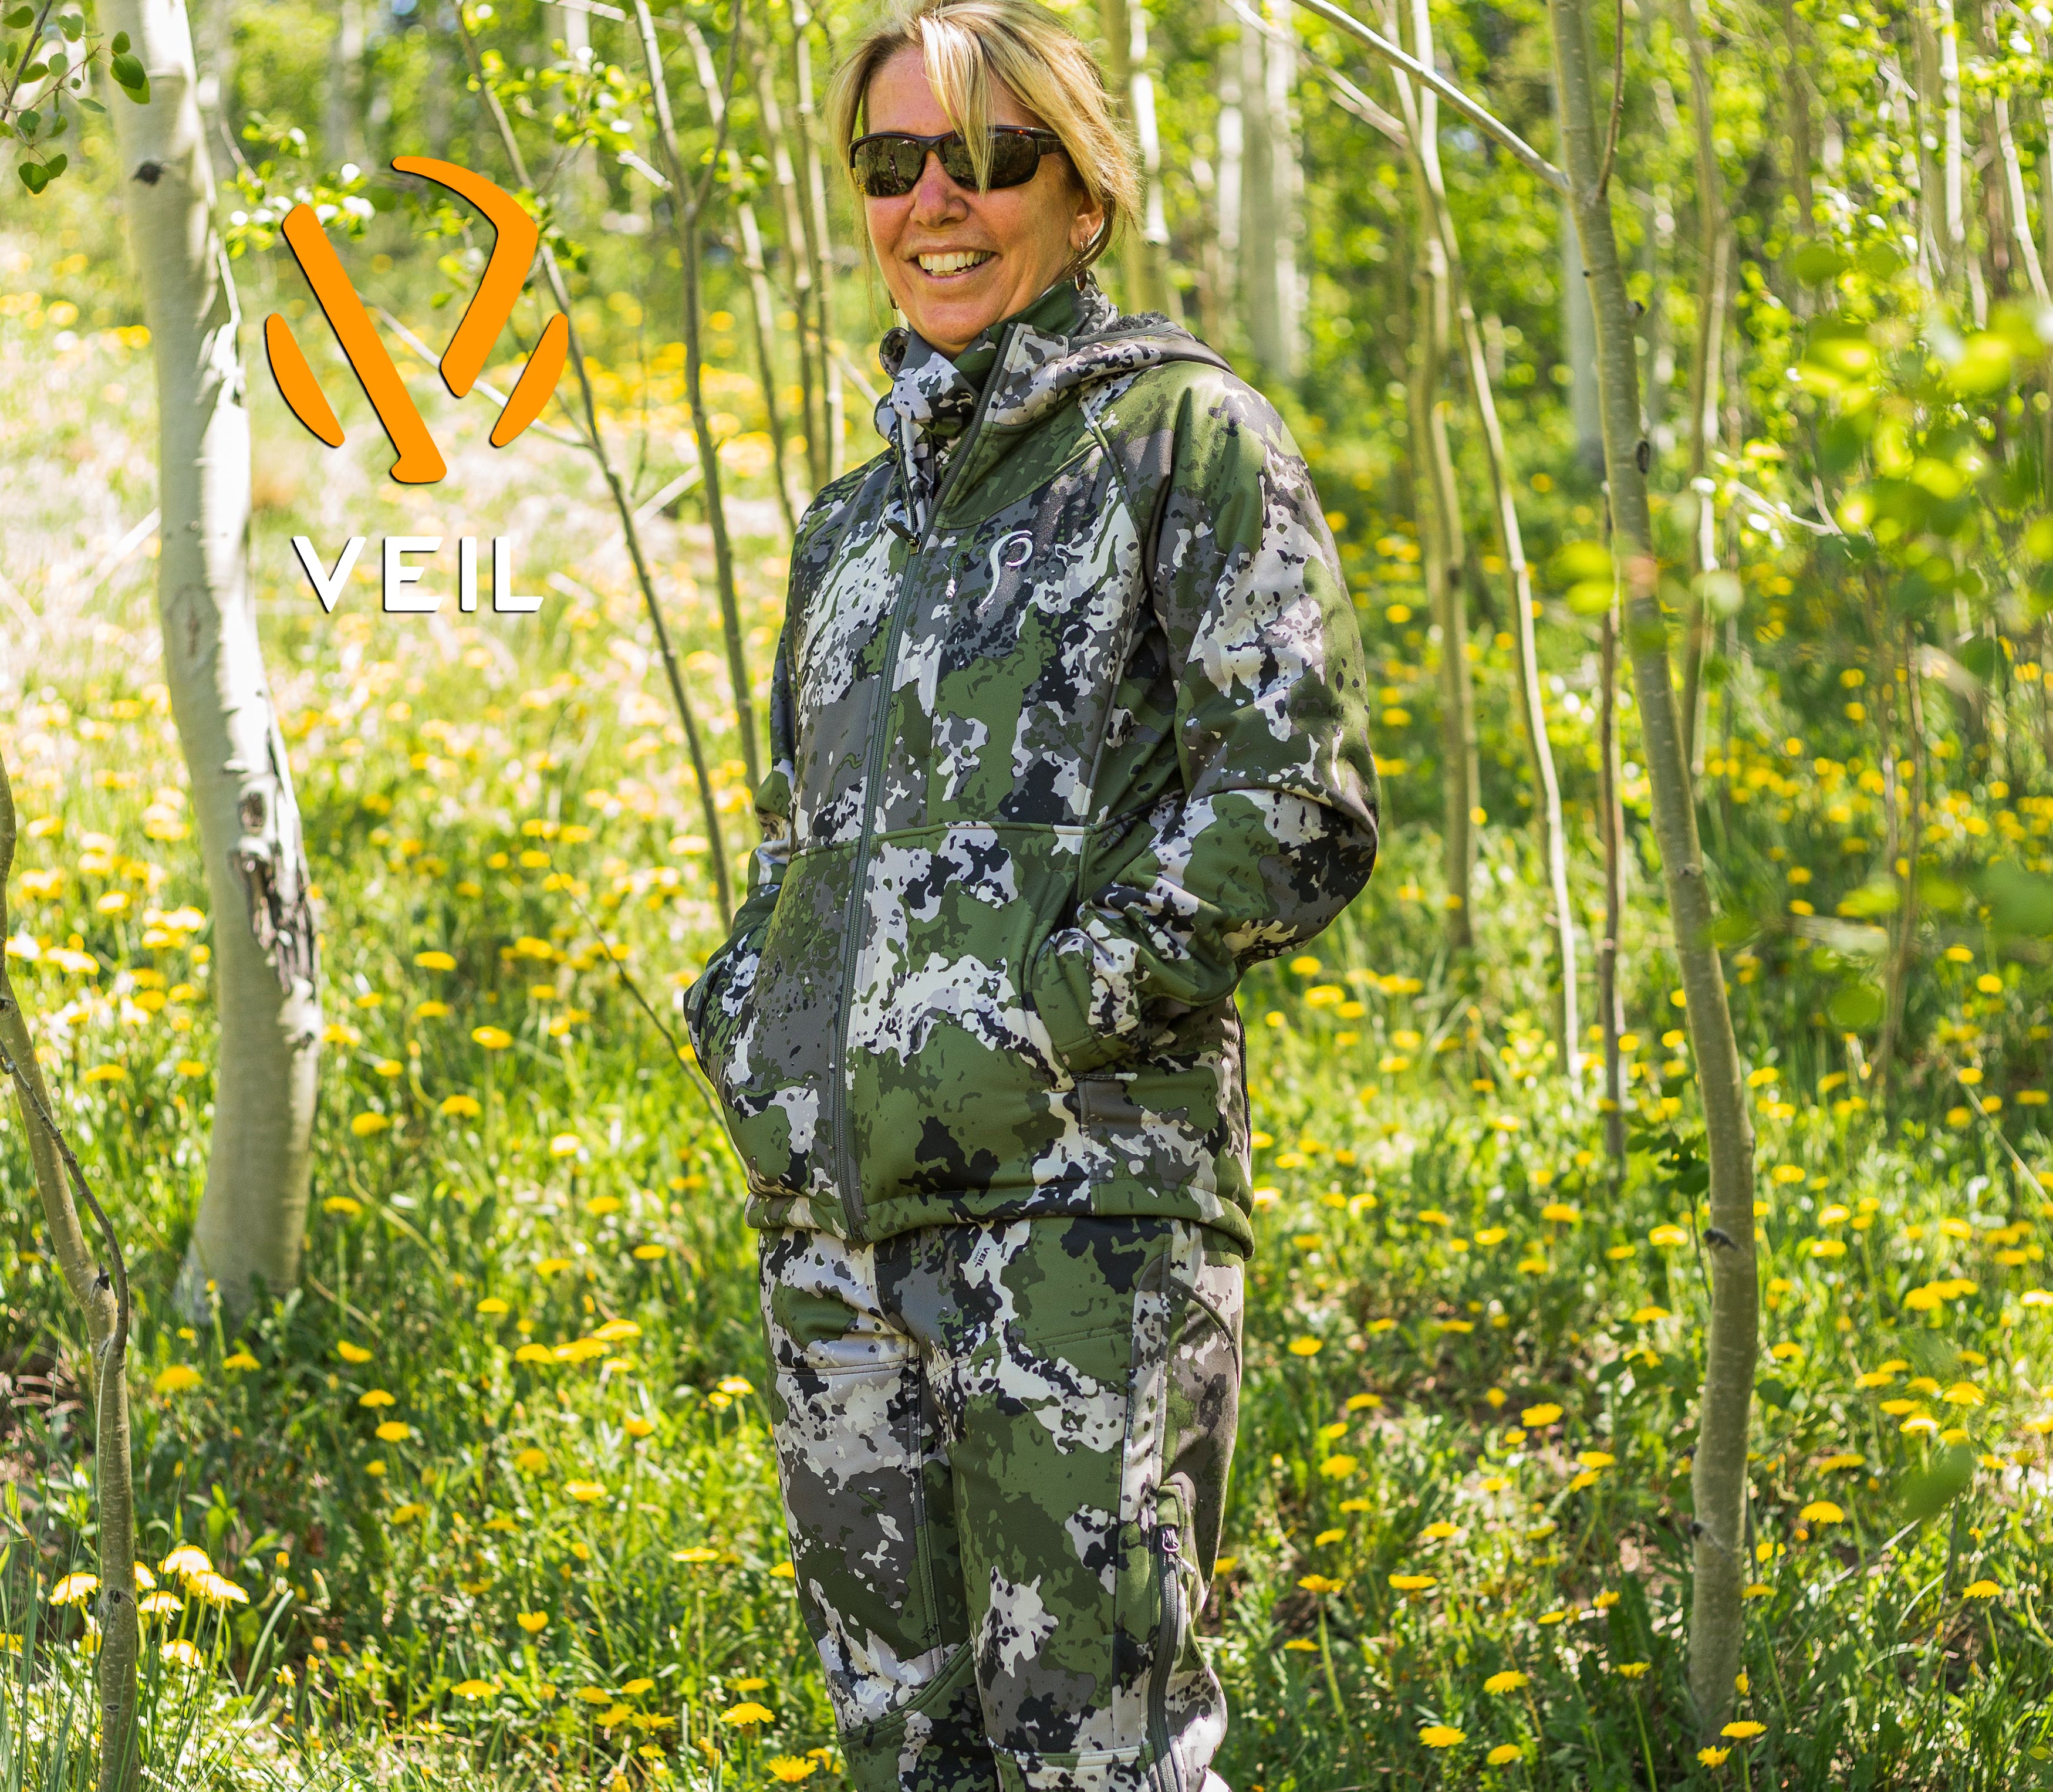 Solas Ultra-Light Freedom Pant – Prois Hunting